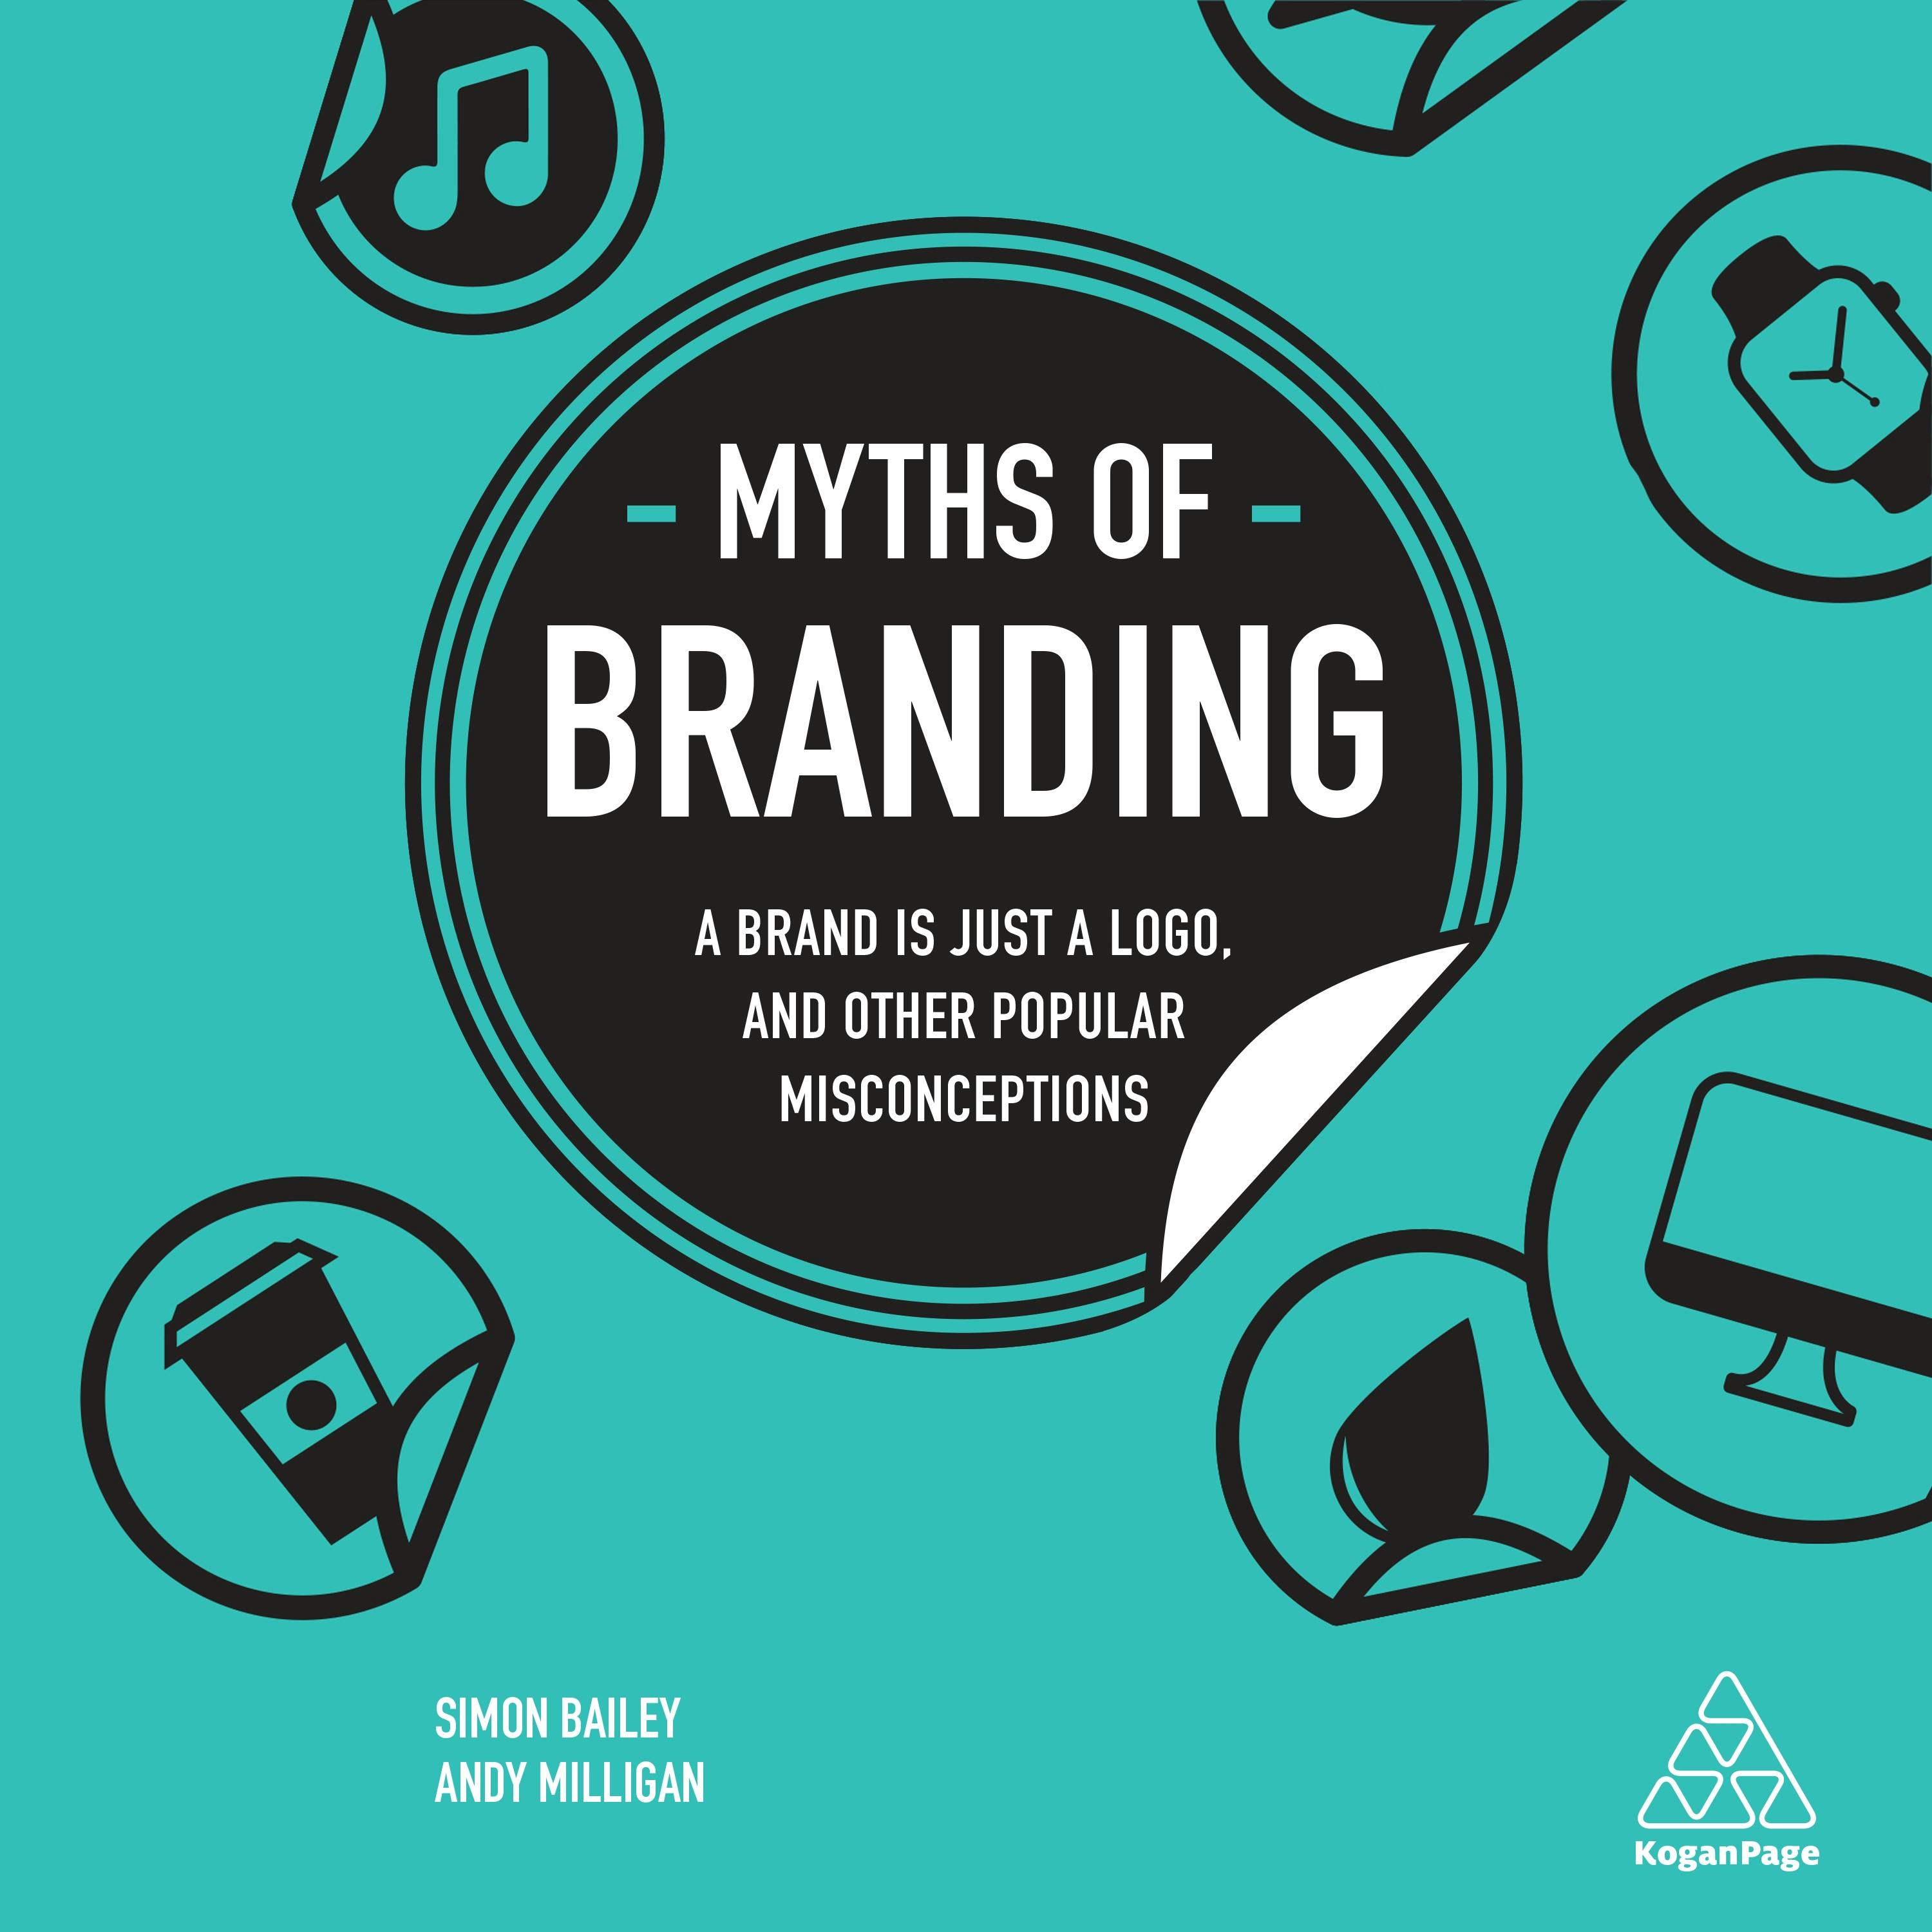 Myths of Branding: A Brand is Just a Logo, and Other Popular Misconceptions - Simon Bailey, Andy Milligan